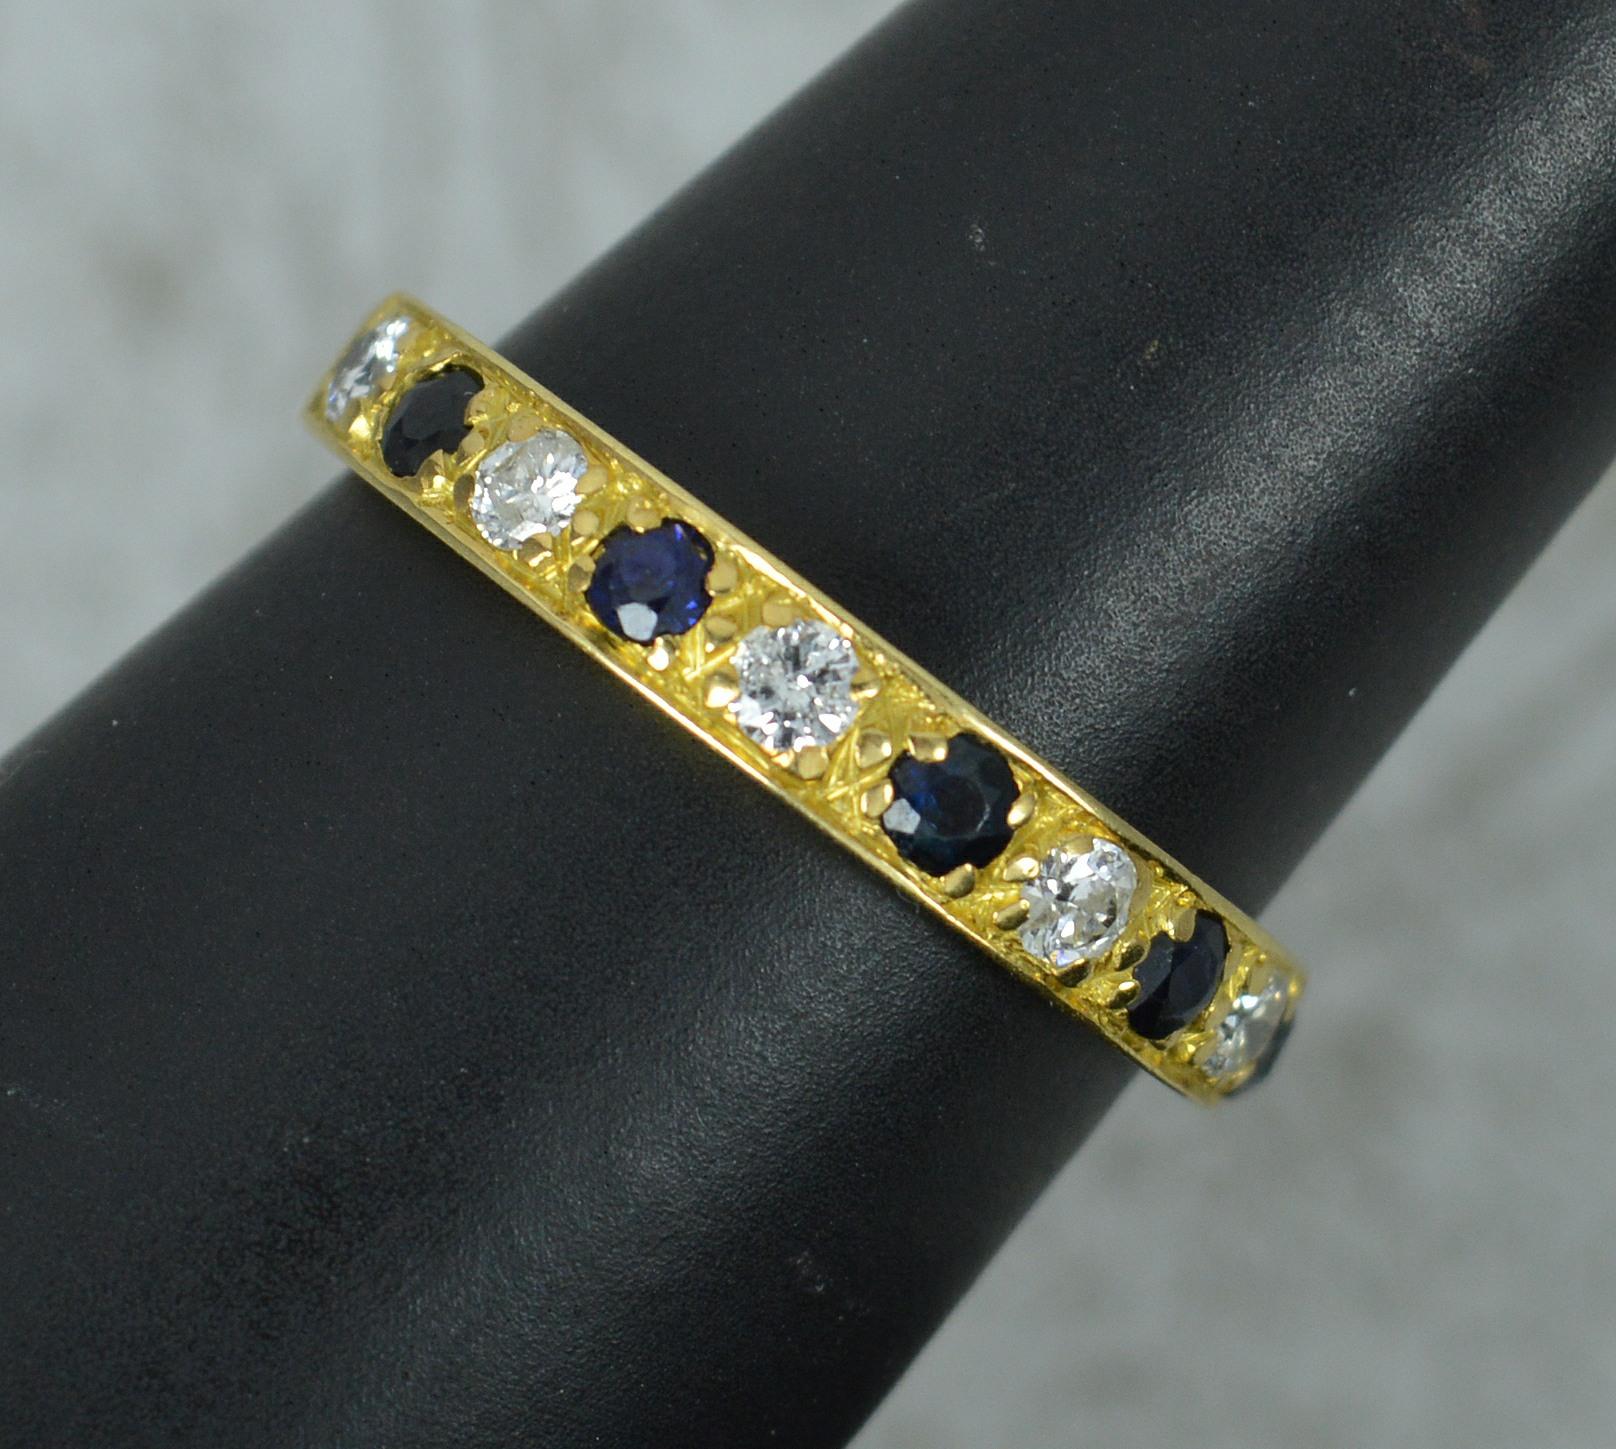 A beautiful half eternity stack ring.
Solid 18 carat yellow gold example.
Designed with alternating round brilliant cut diamonds and blue sapphires.
22mm spread of stones. 3.5mm wide band to front.

CONDITION ; Very good. Crisp design. Well set